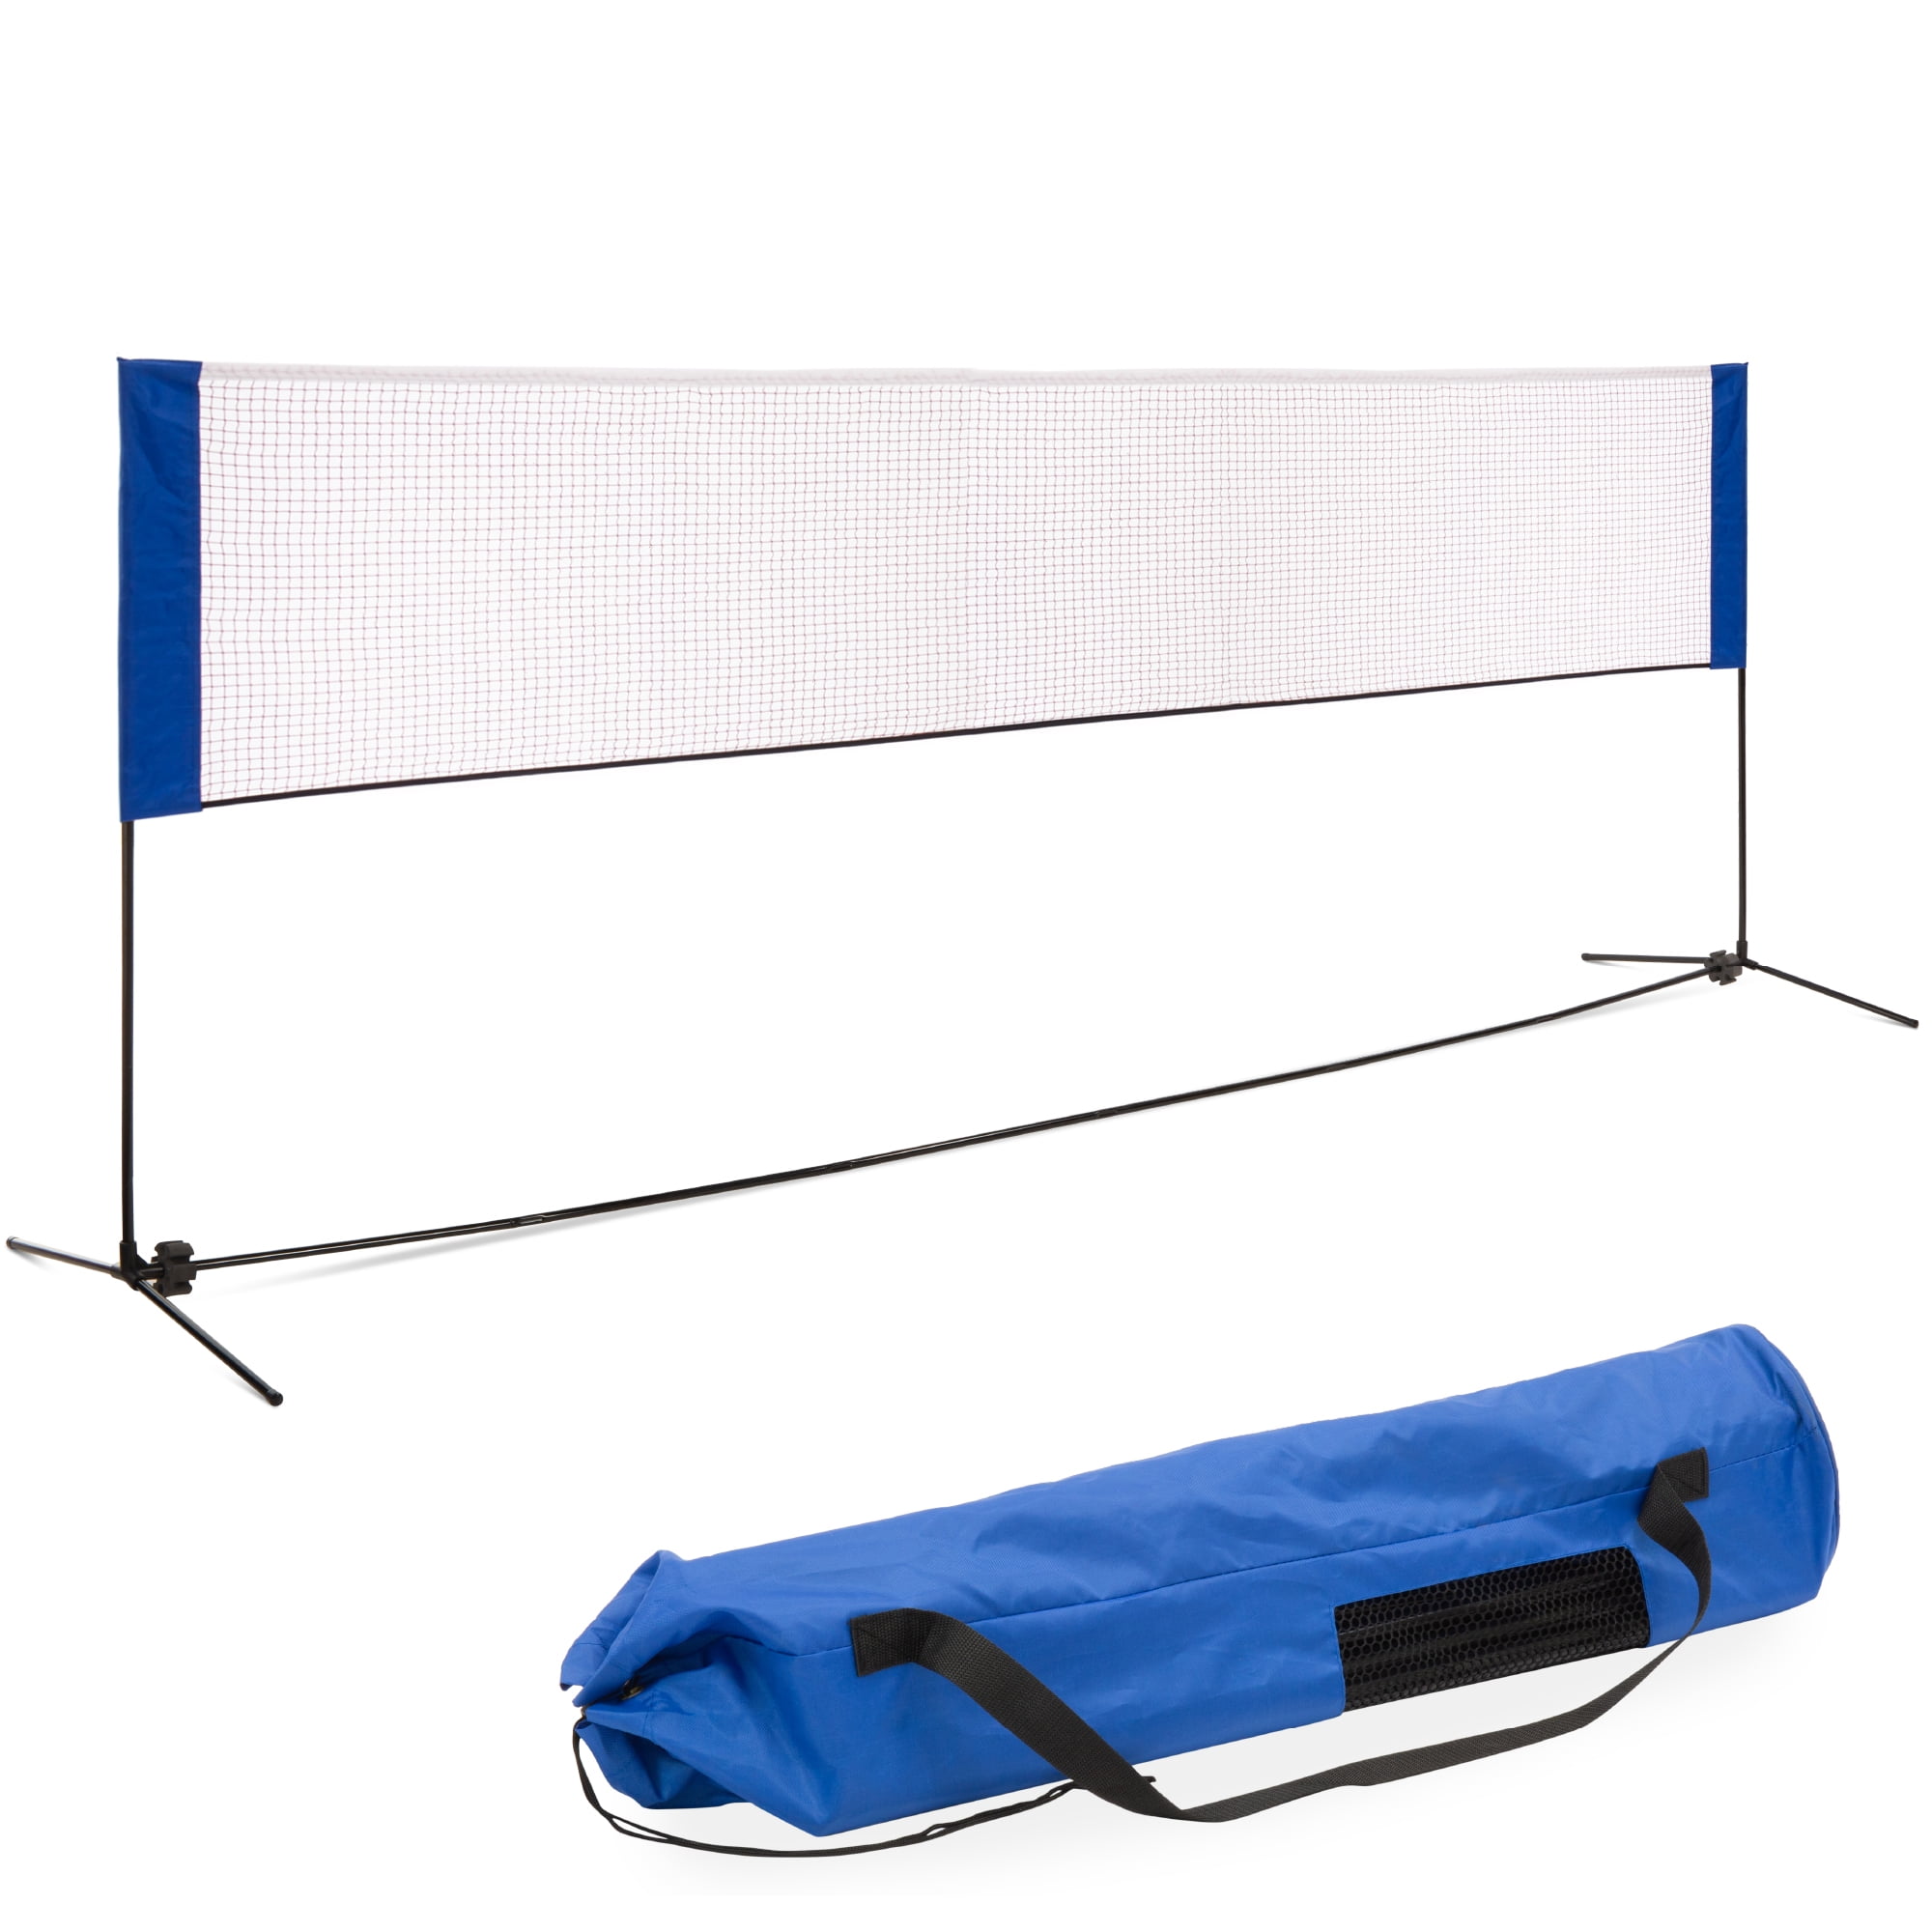 Portable Removable Volleyball Badminton Net Set With Stand Carrying Bag for Indoor Outdoor Sport